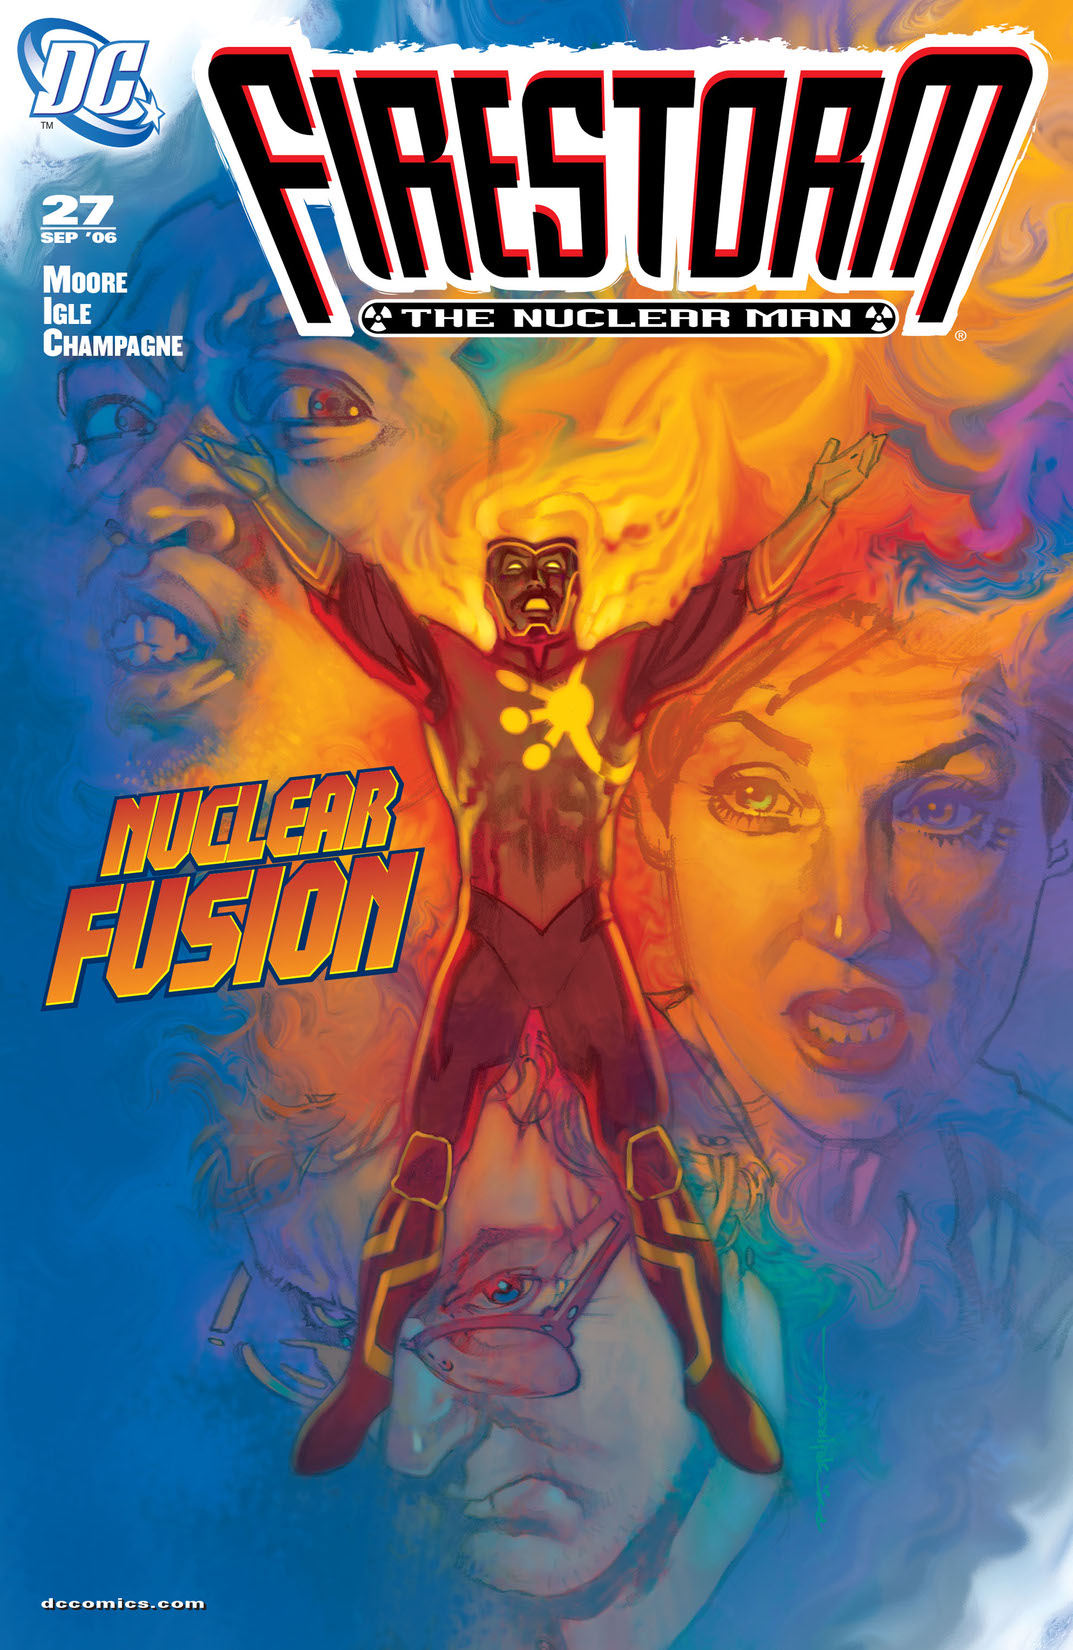 Firestorm: The Nuclear Man #27 preview images